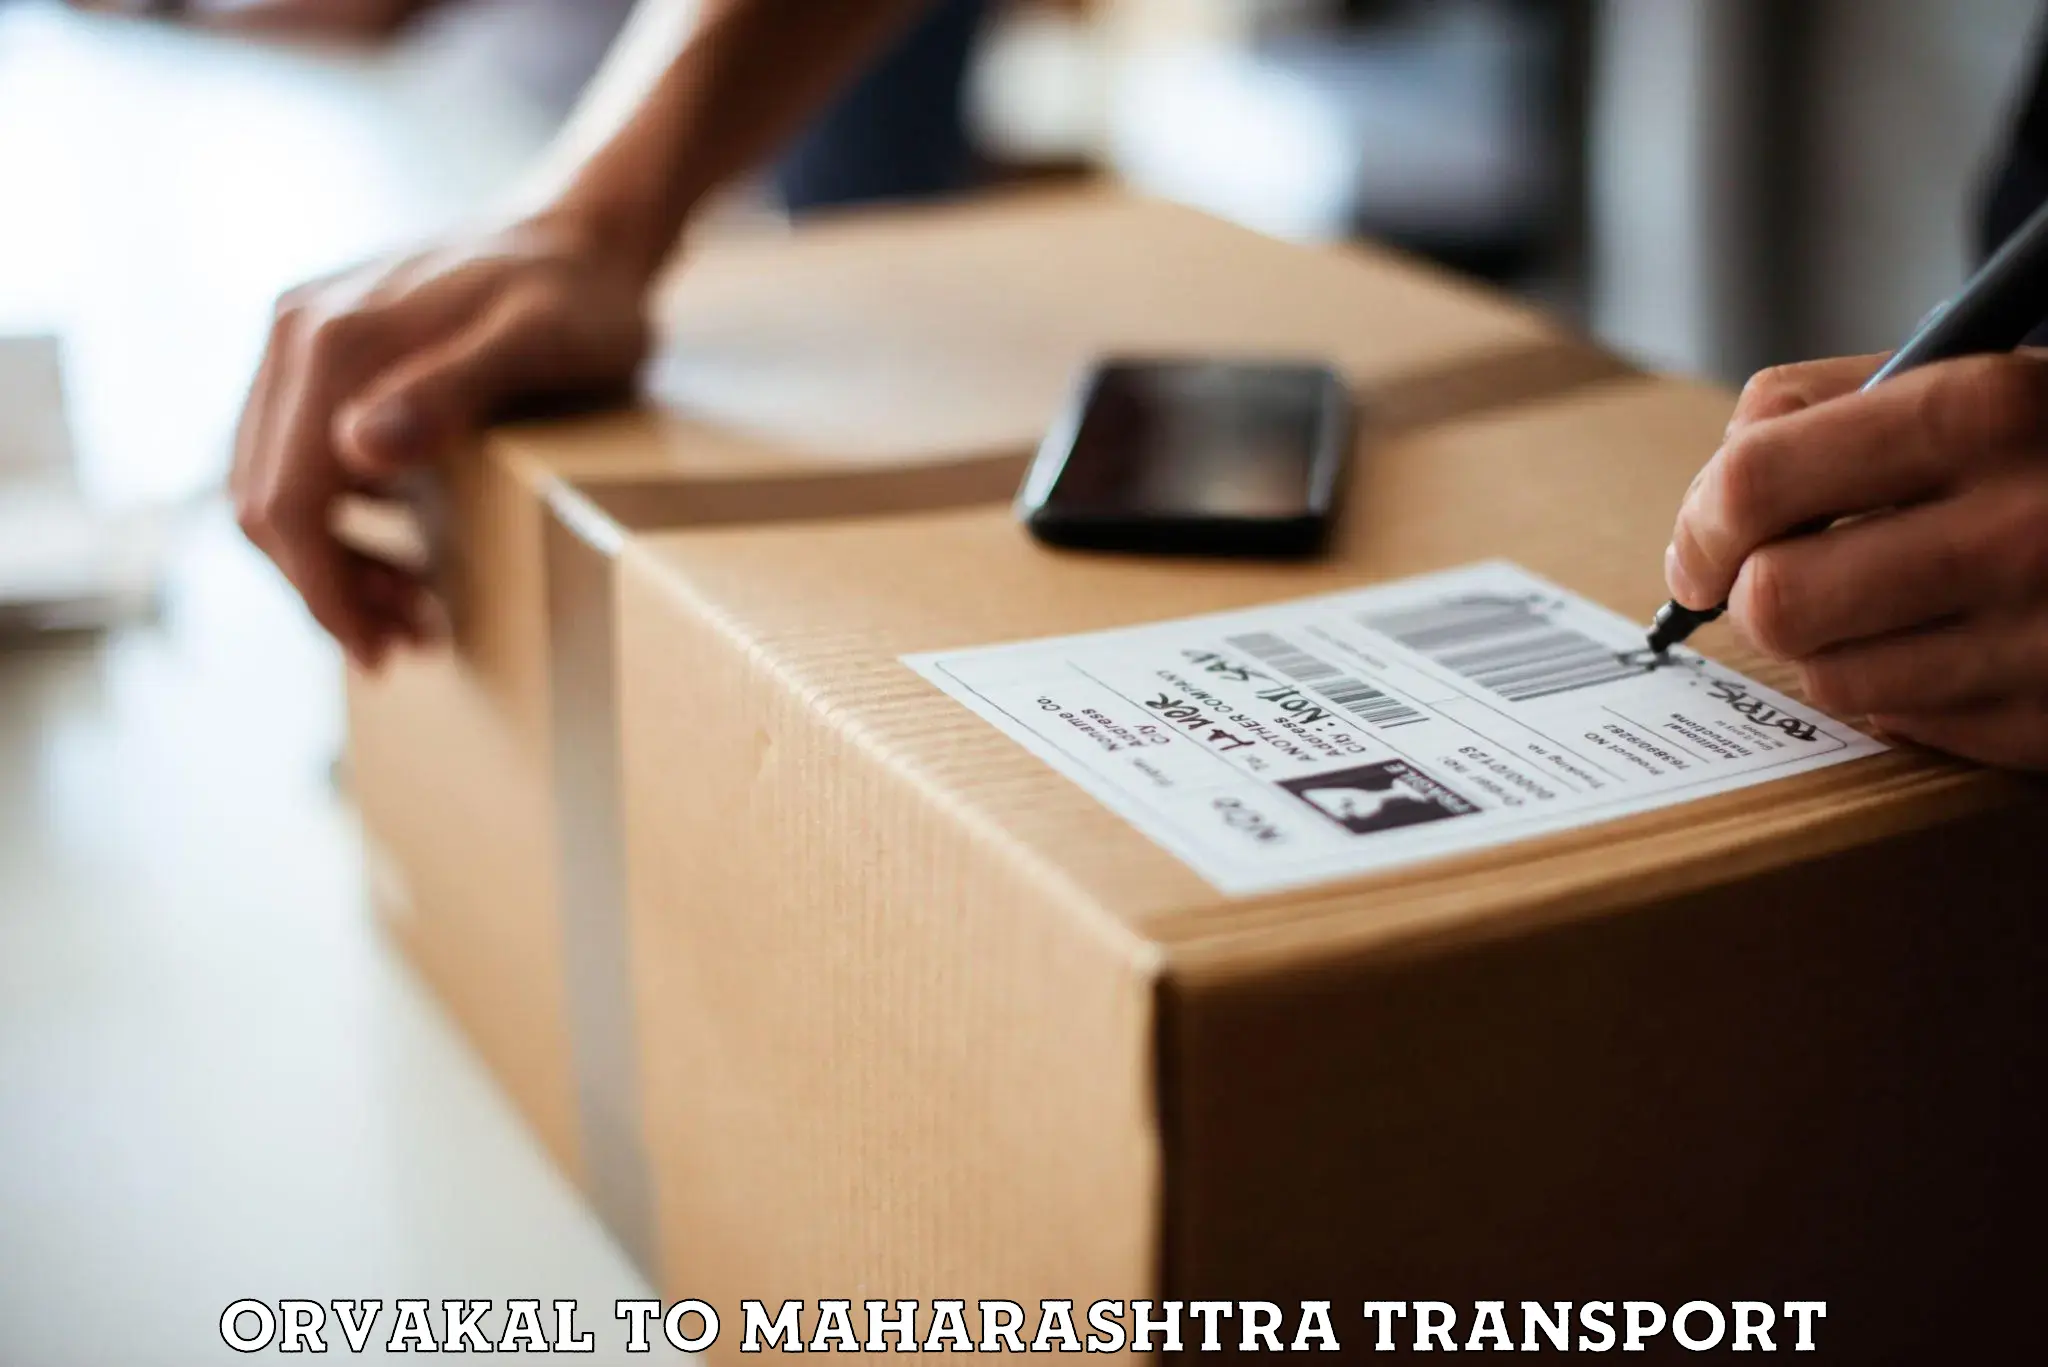 Transport bike from one state to another Orvakal to Maharashtra